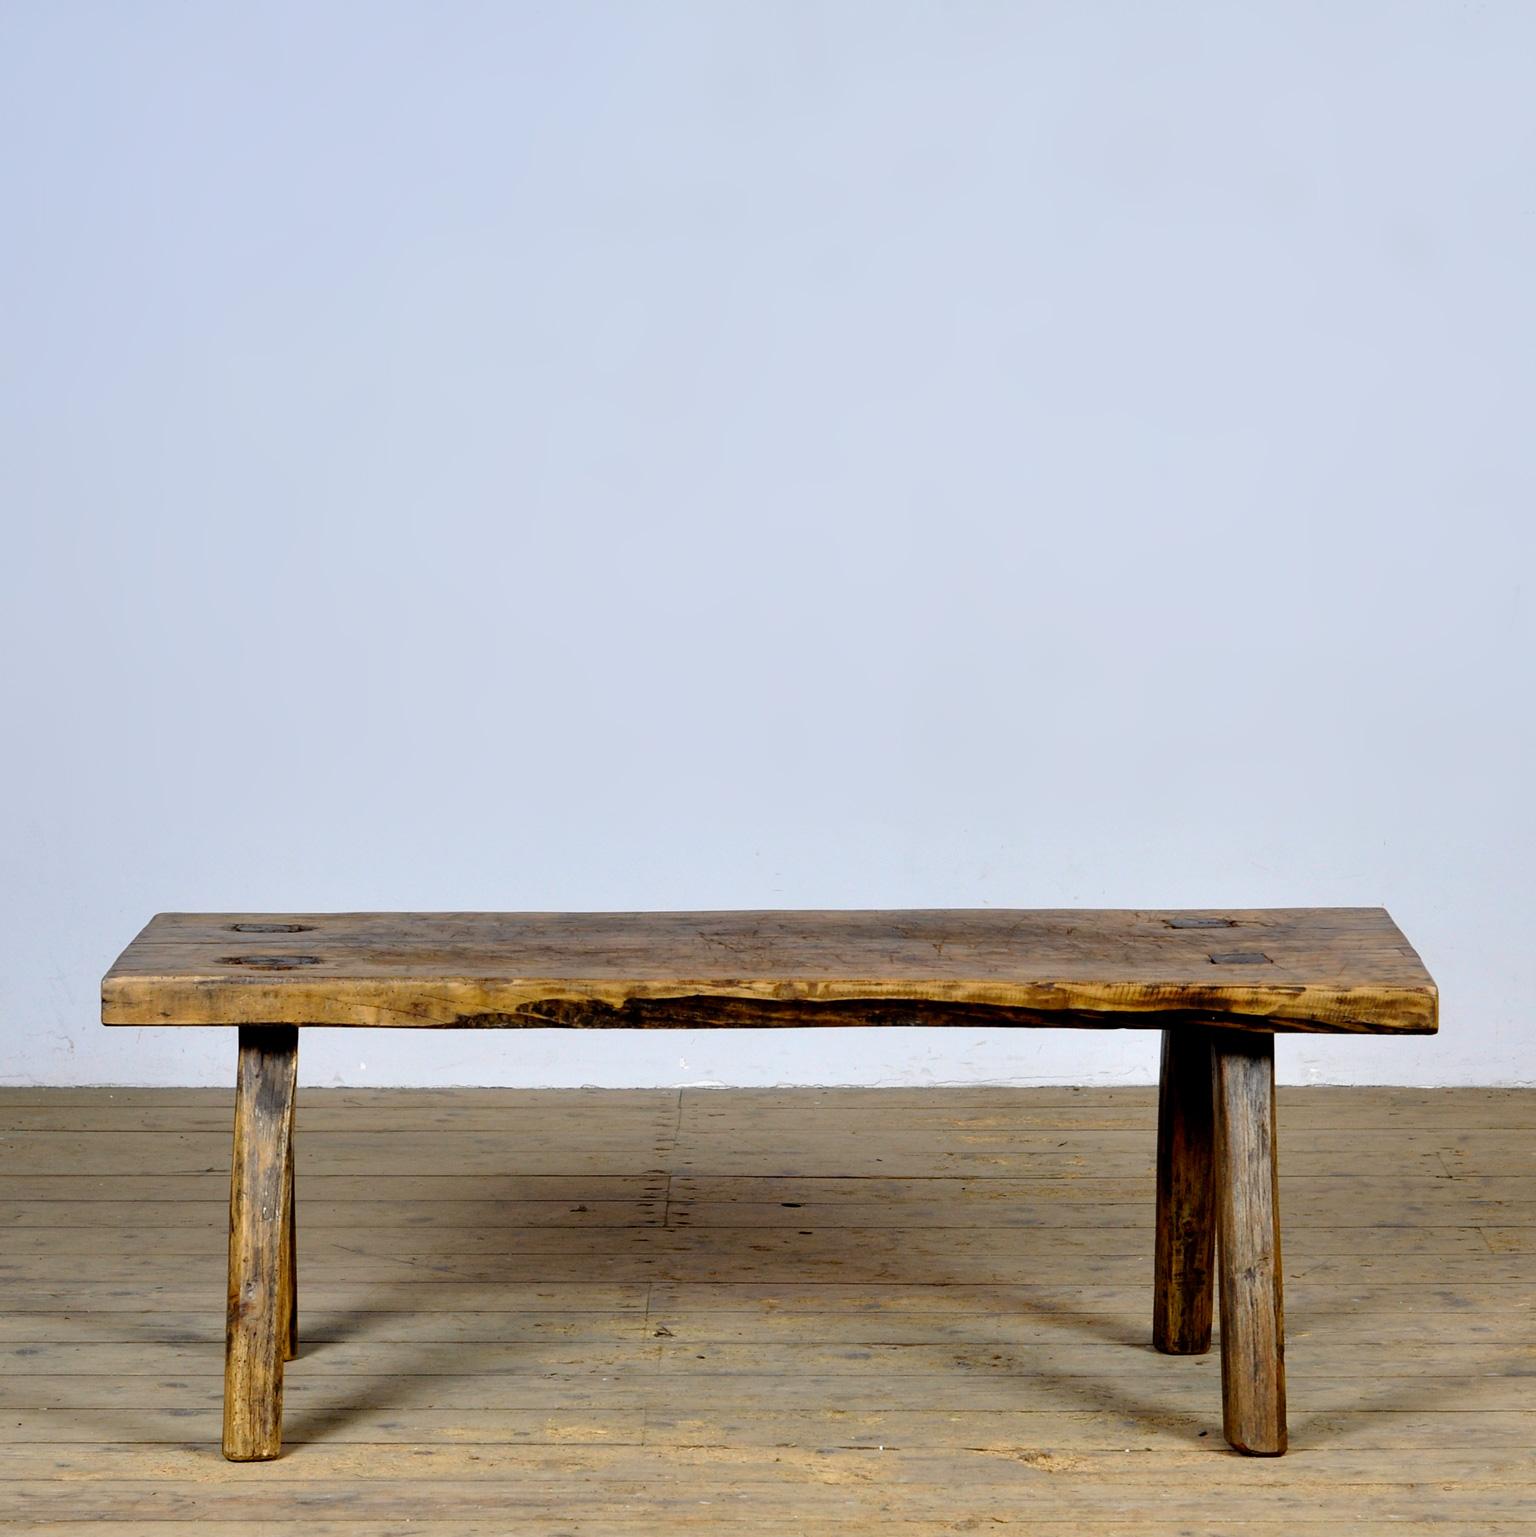 Butcher’s table from the 1930s. Made of oak wood. With a beautiful weathered leaf of 5 cm thick. The legs have been shortened to coffee table/sofa height. The maker marked the legs with numbers at the time. Treated against woodworm.